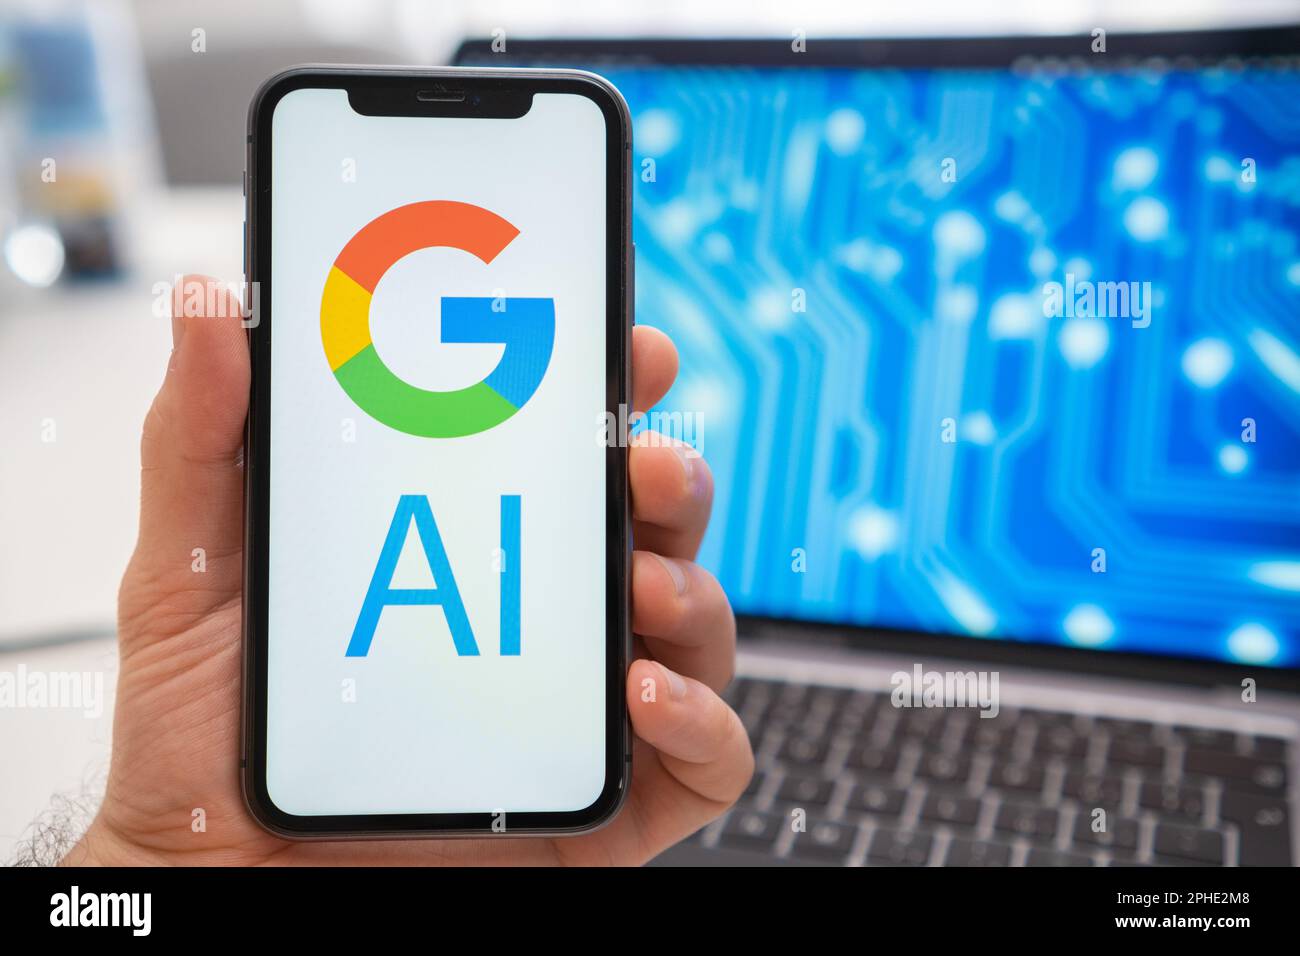 Google AI logo of neural network on the screen of smartphone in mans hand and laptop with neuronet on the splash screen on the background. Artificial intelligence concept.  Stock Photo